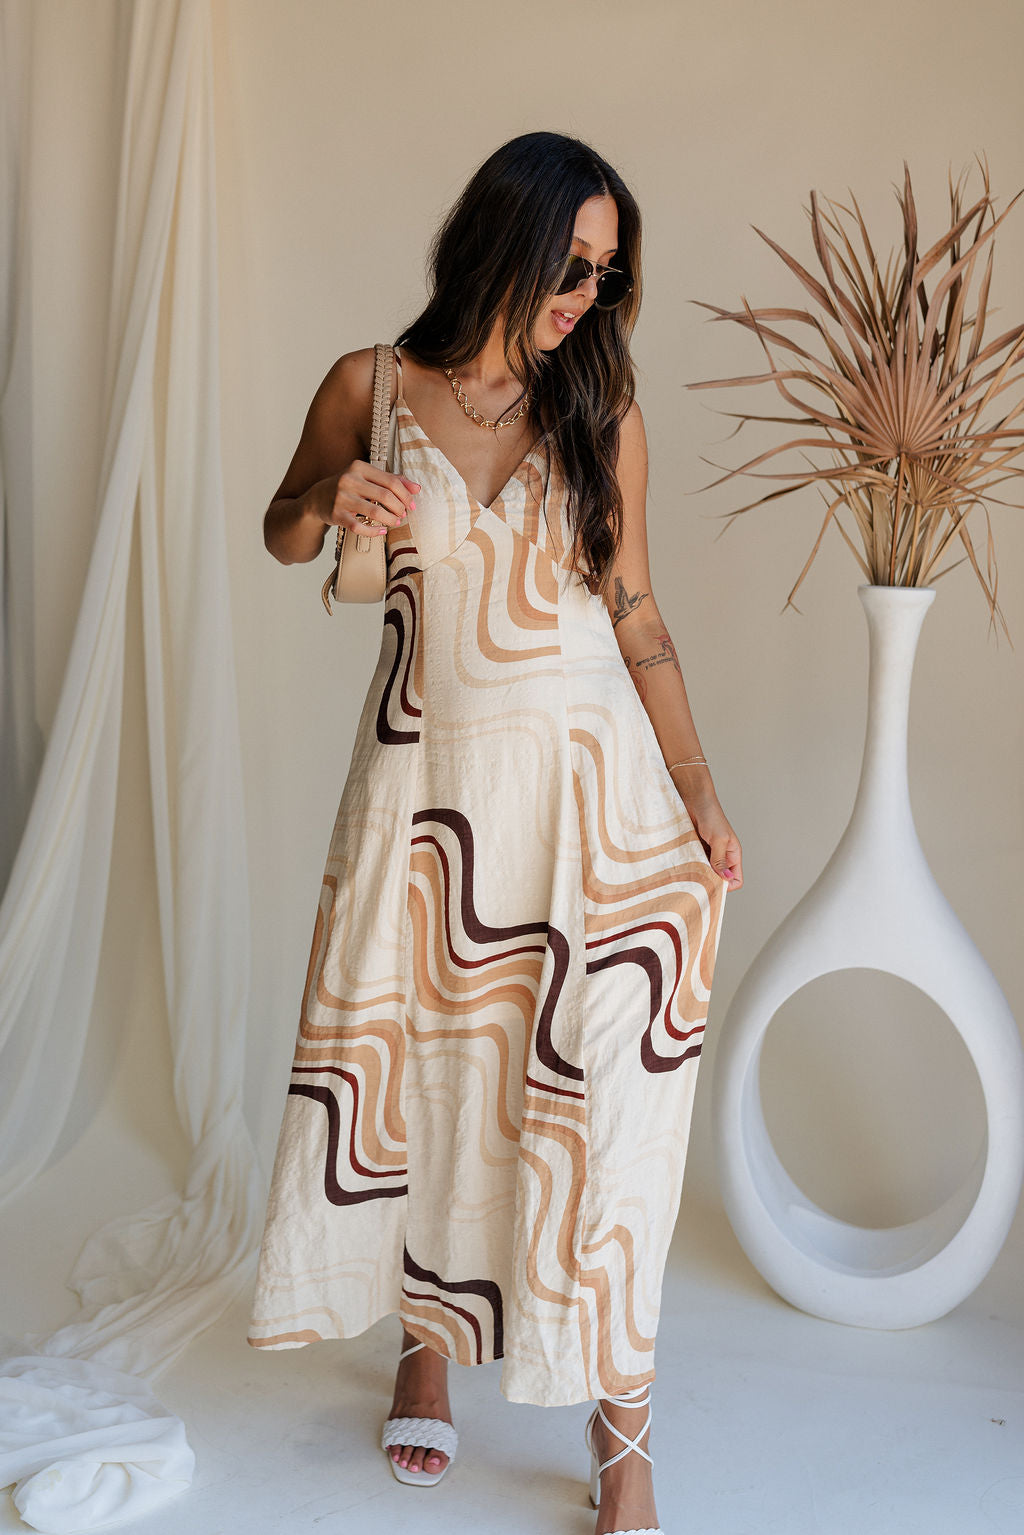 Full body front view of female model wearing the Wren Neutral Swirl Print Maxi Dress that has cream fabric with a taupe and brown swirl print, a v neck, and an open back with ties.